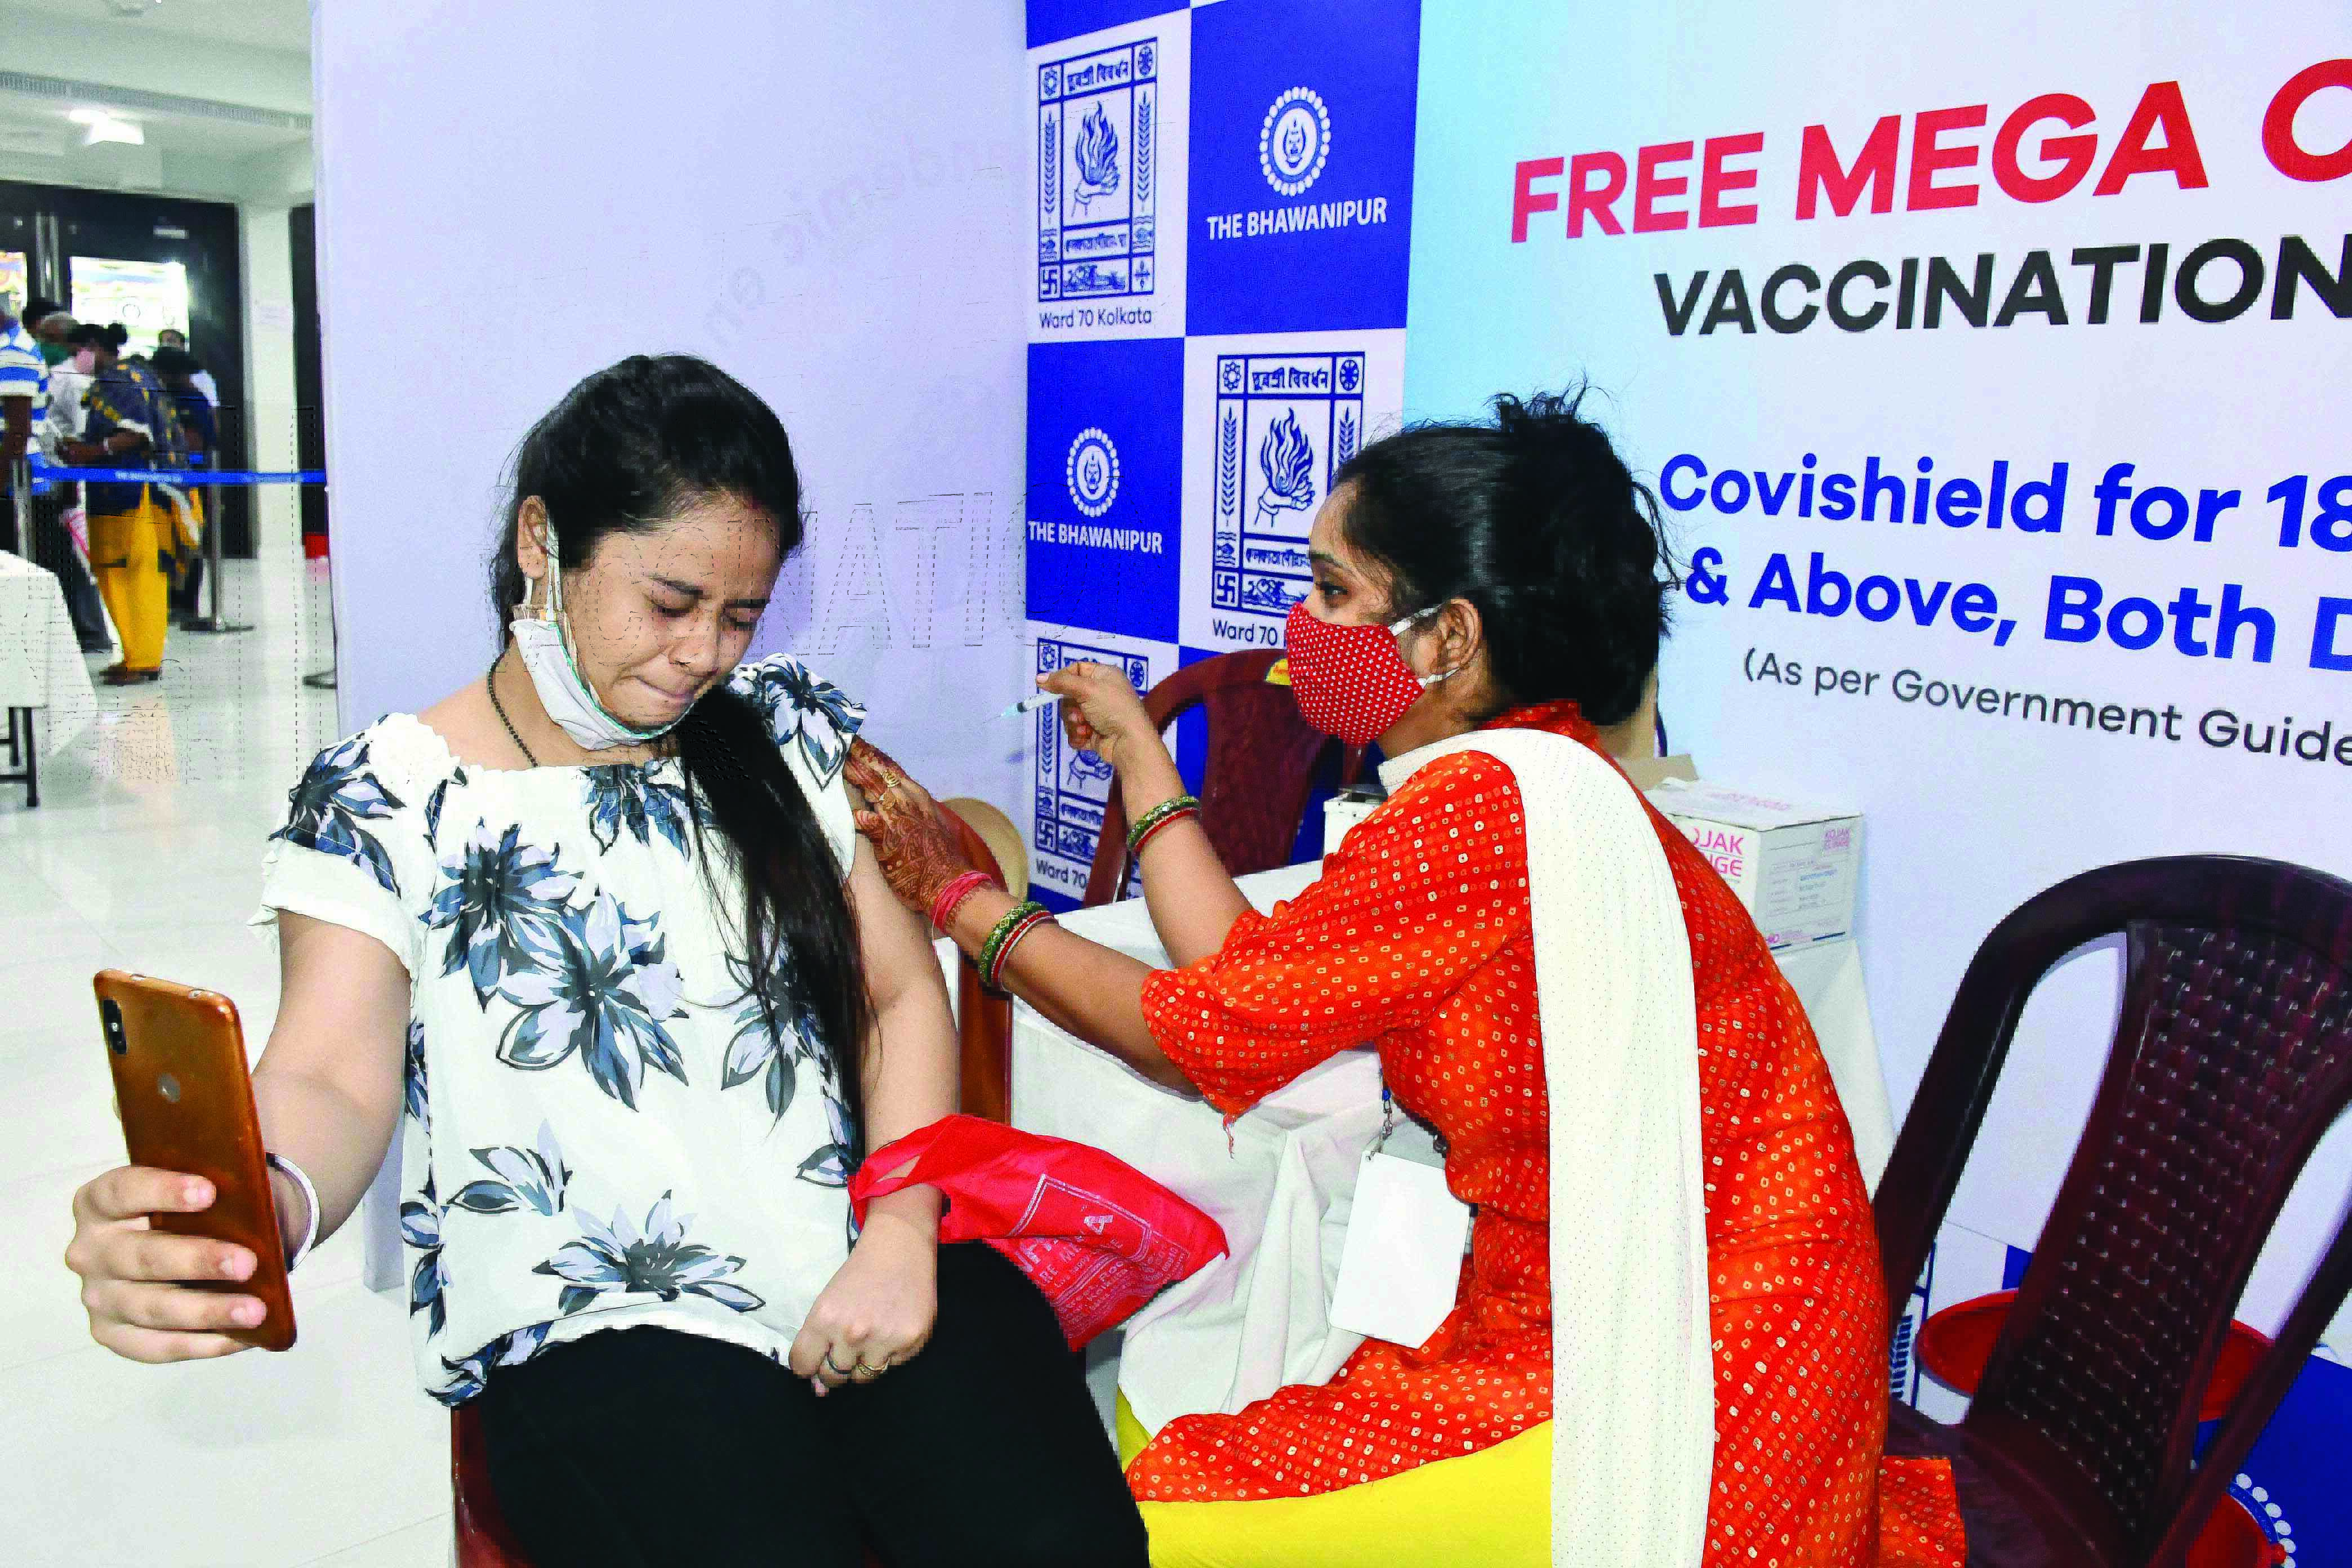 State starts giving 2nd jab for 15-18 years age group